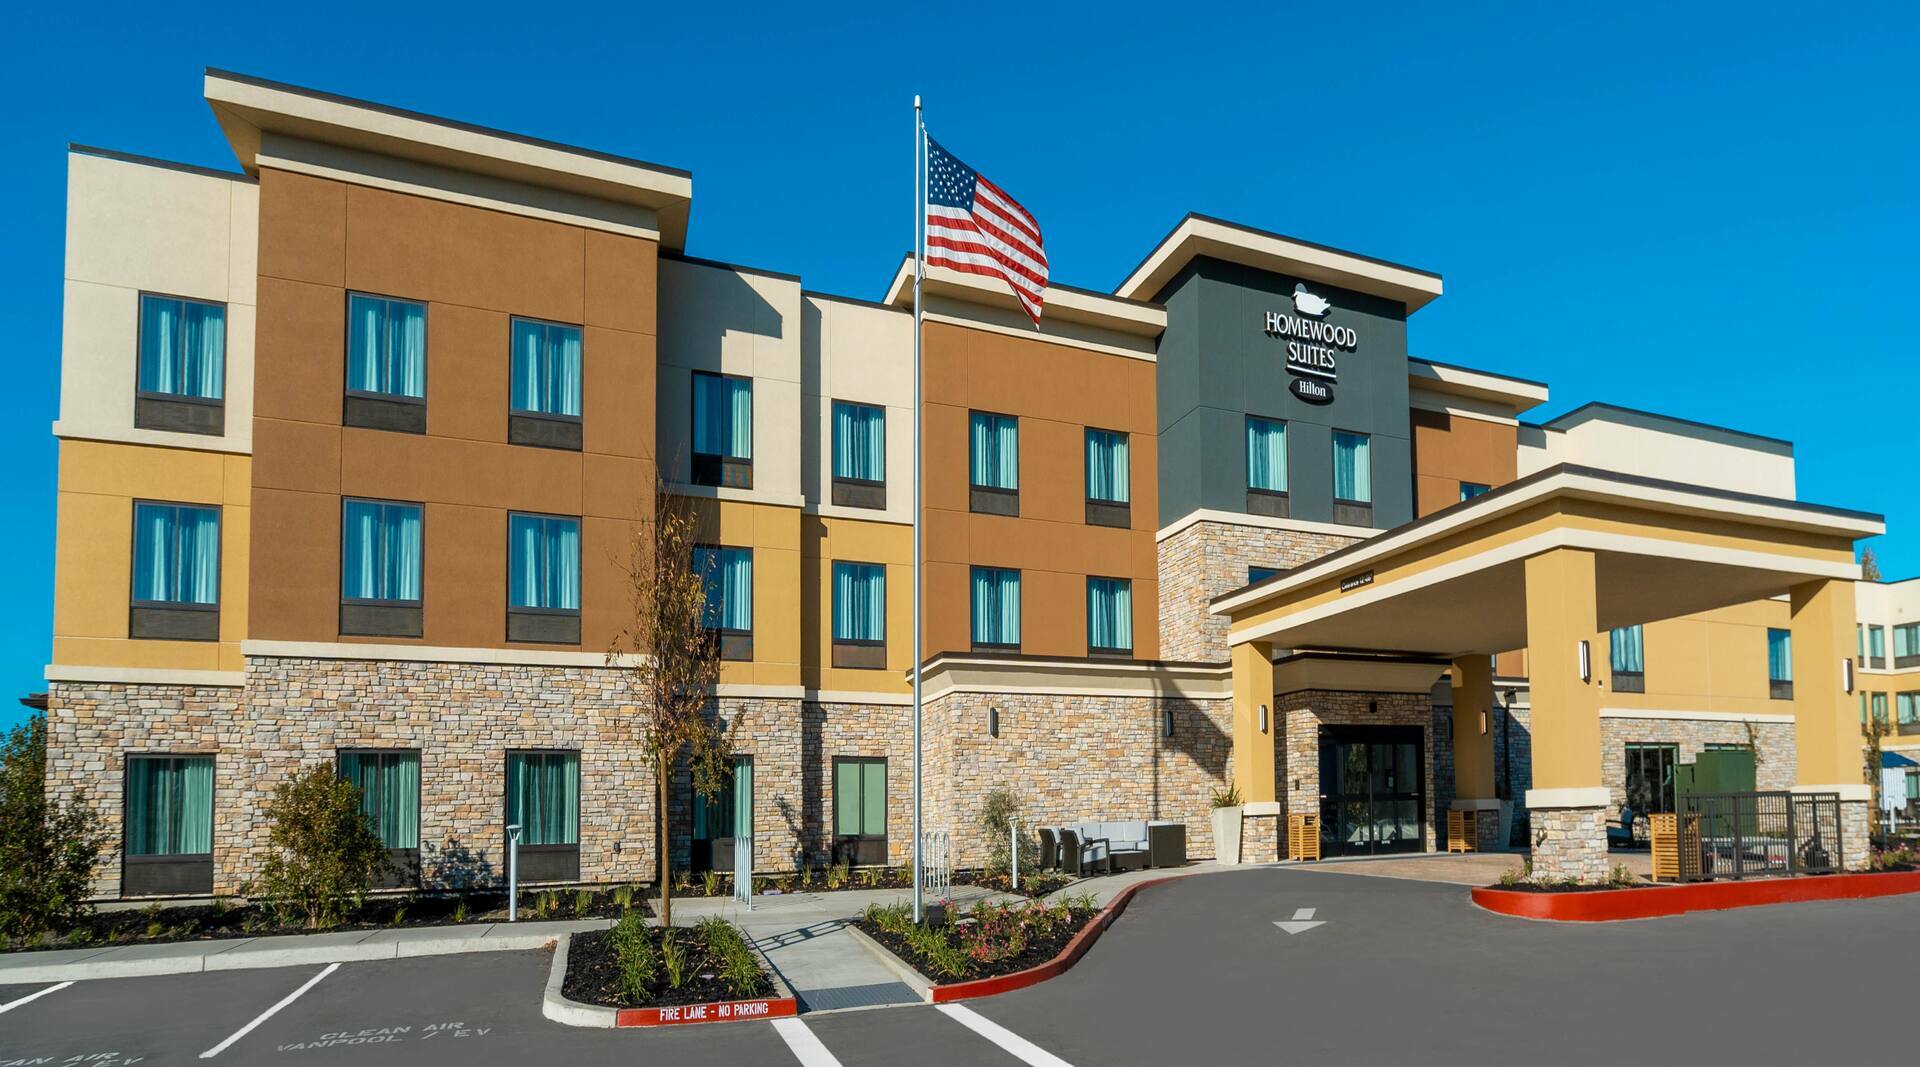 Photo of Homewood Suites by Hilton Livermore, Livermore, CA